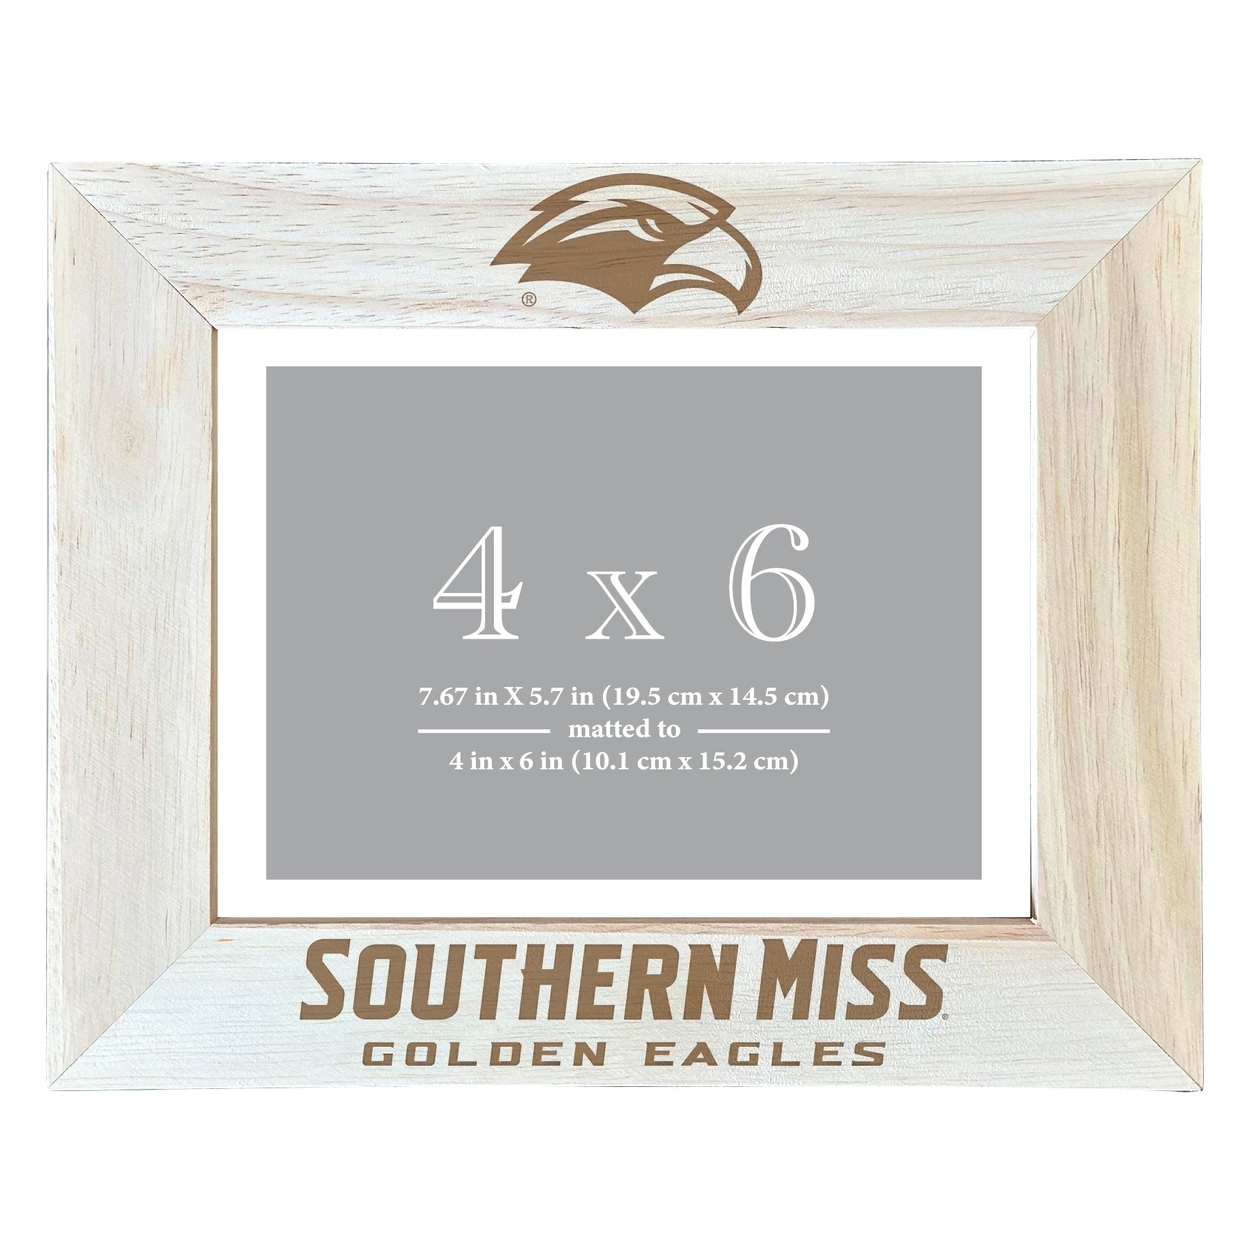 Southern Mississippi Golden Eagles Wooden Photo Frame Matted To 4 X 6 Inch - Etched